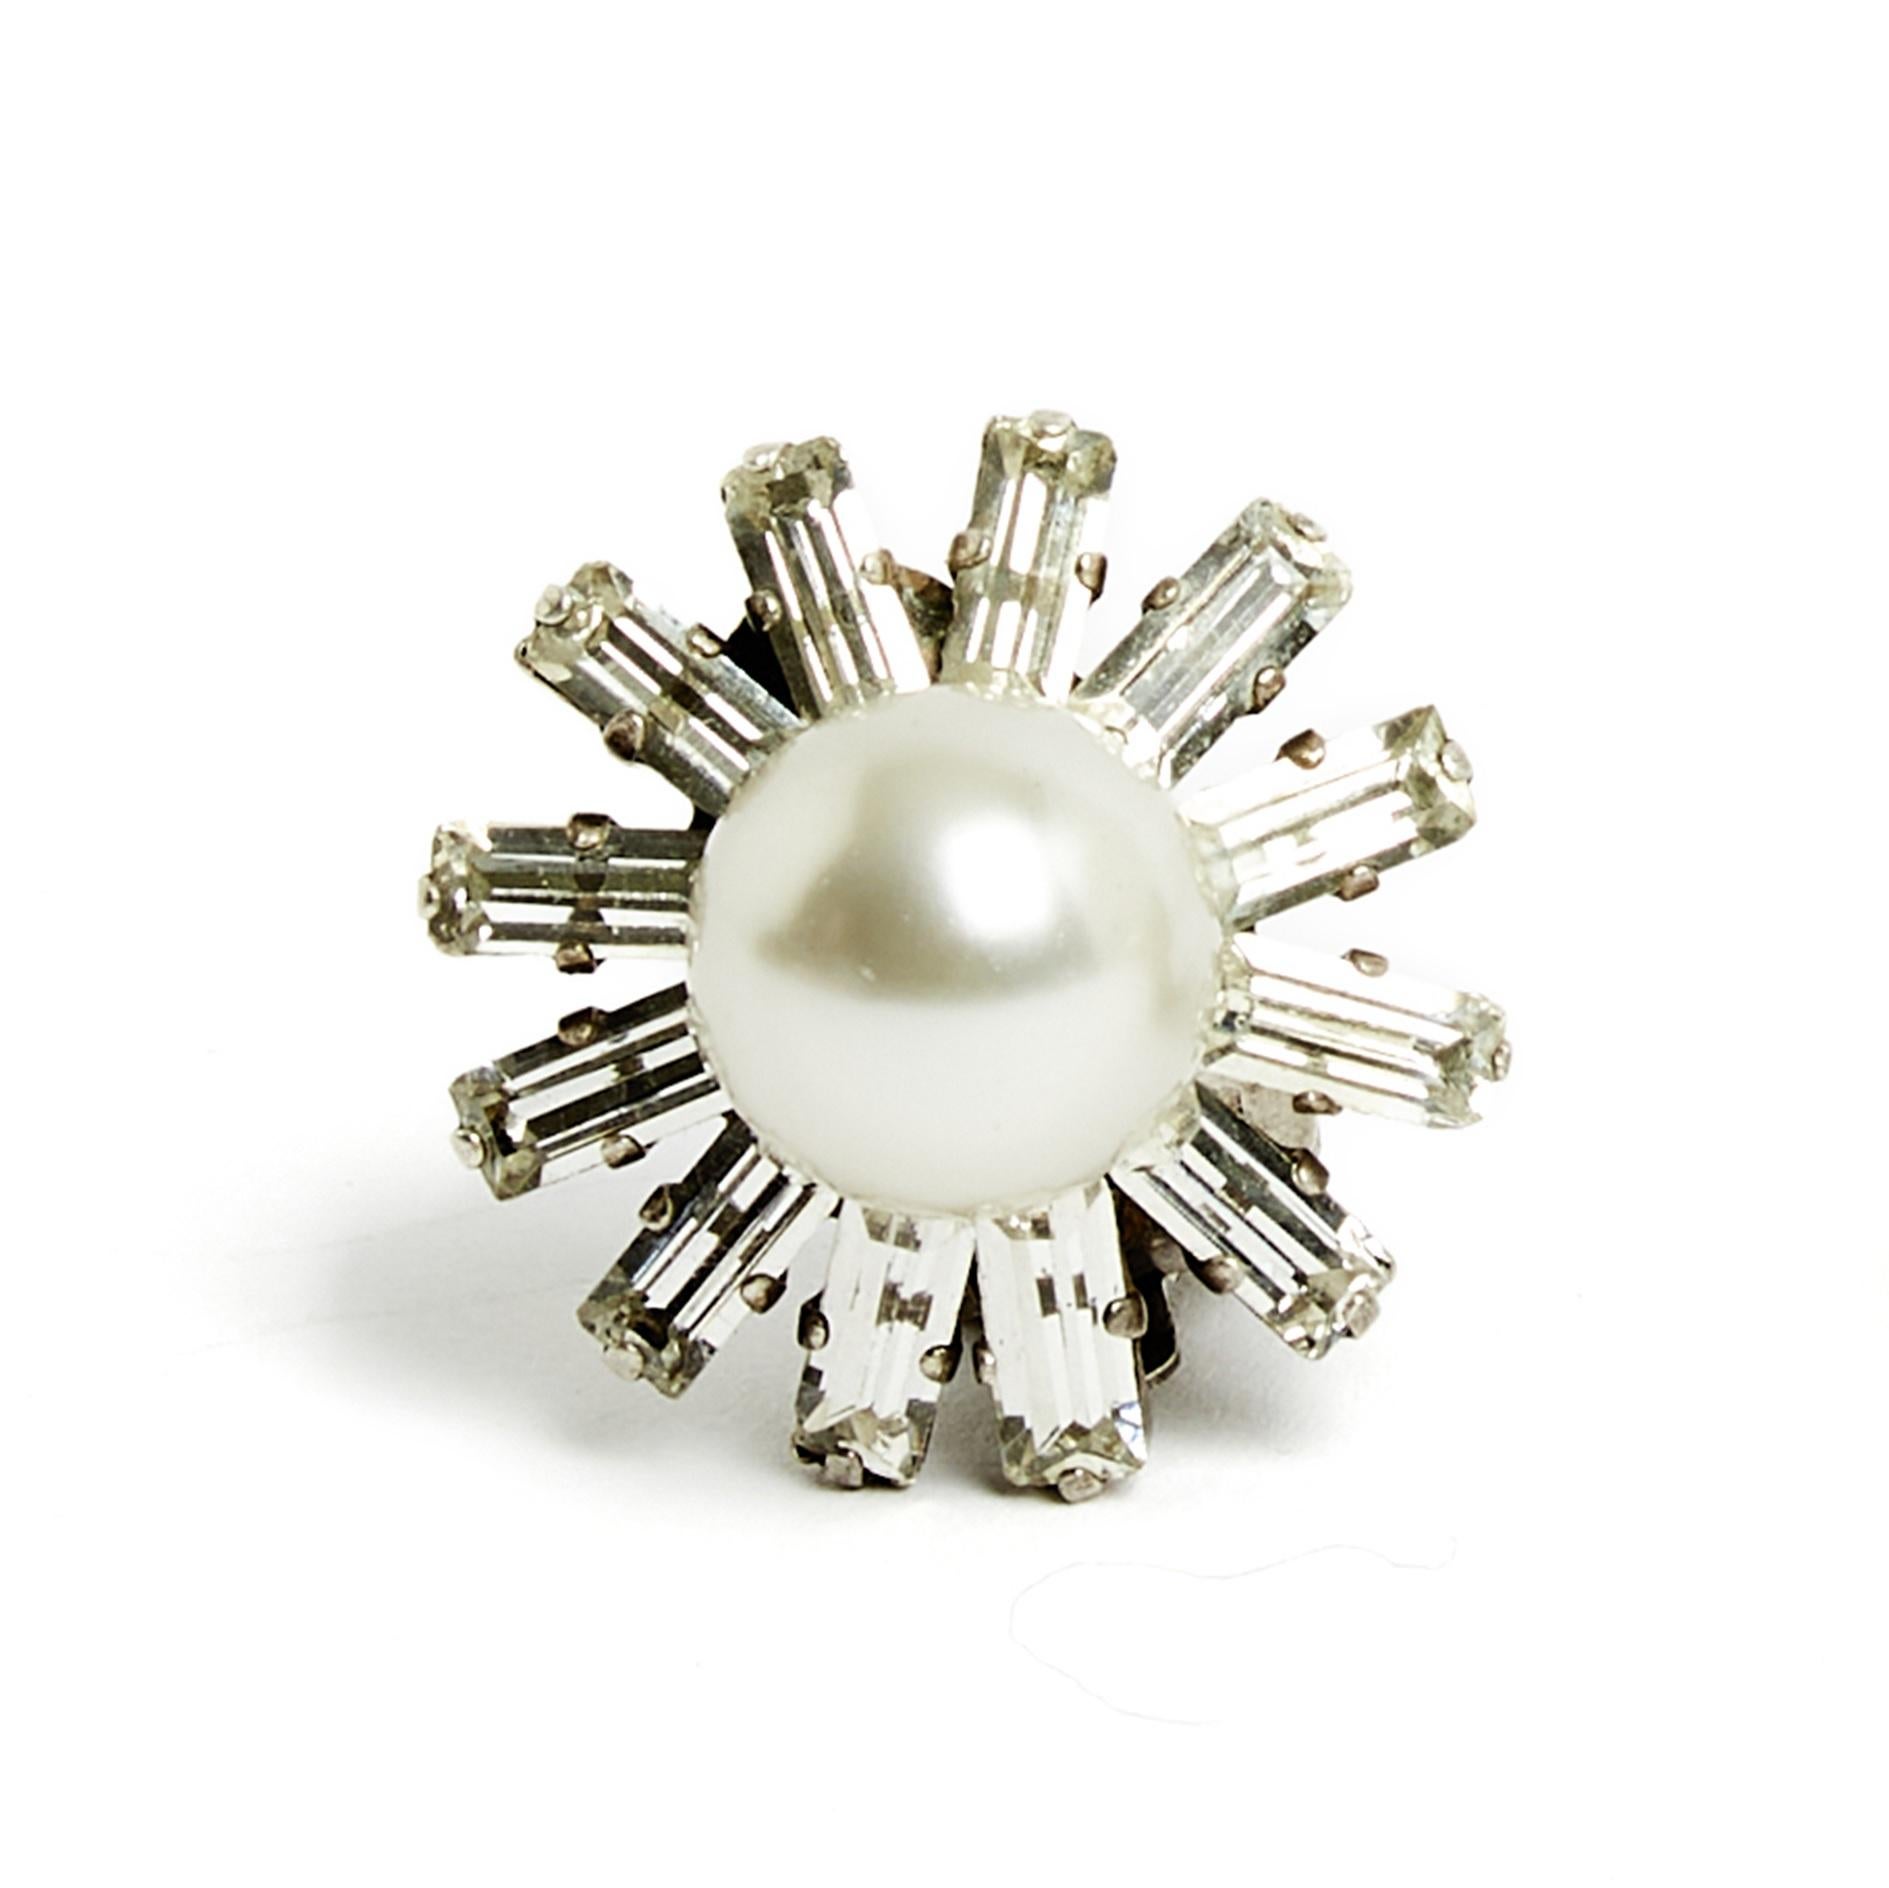 Chanel Haute Couture earrings, silver metal clips composed of a large fancy pearl surrounded by white star shaped baguette rhinestones. Diameter 2.5 cm. The earrings are probably vintage but they are in very good condition, pearls intact and bright,